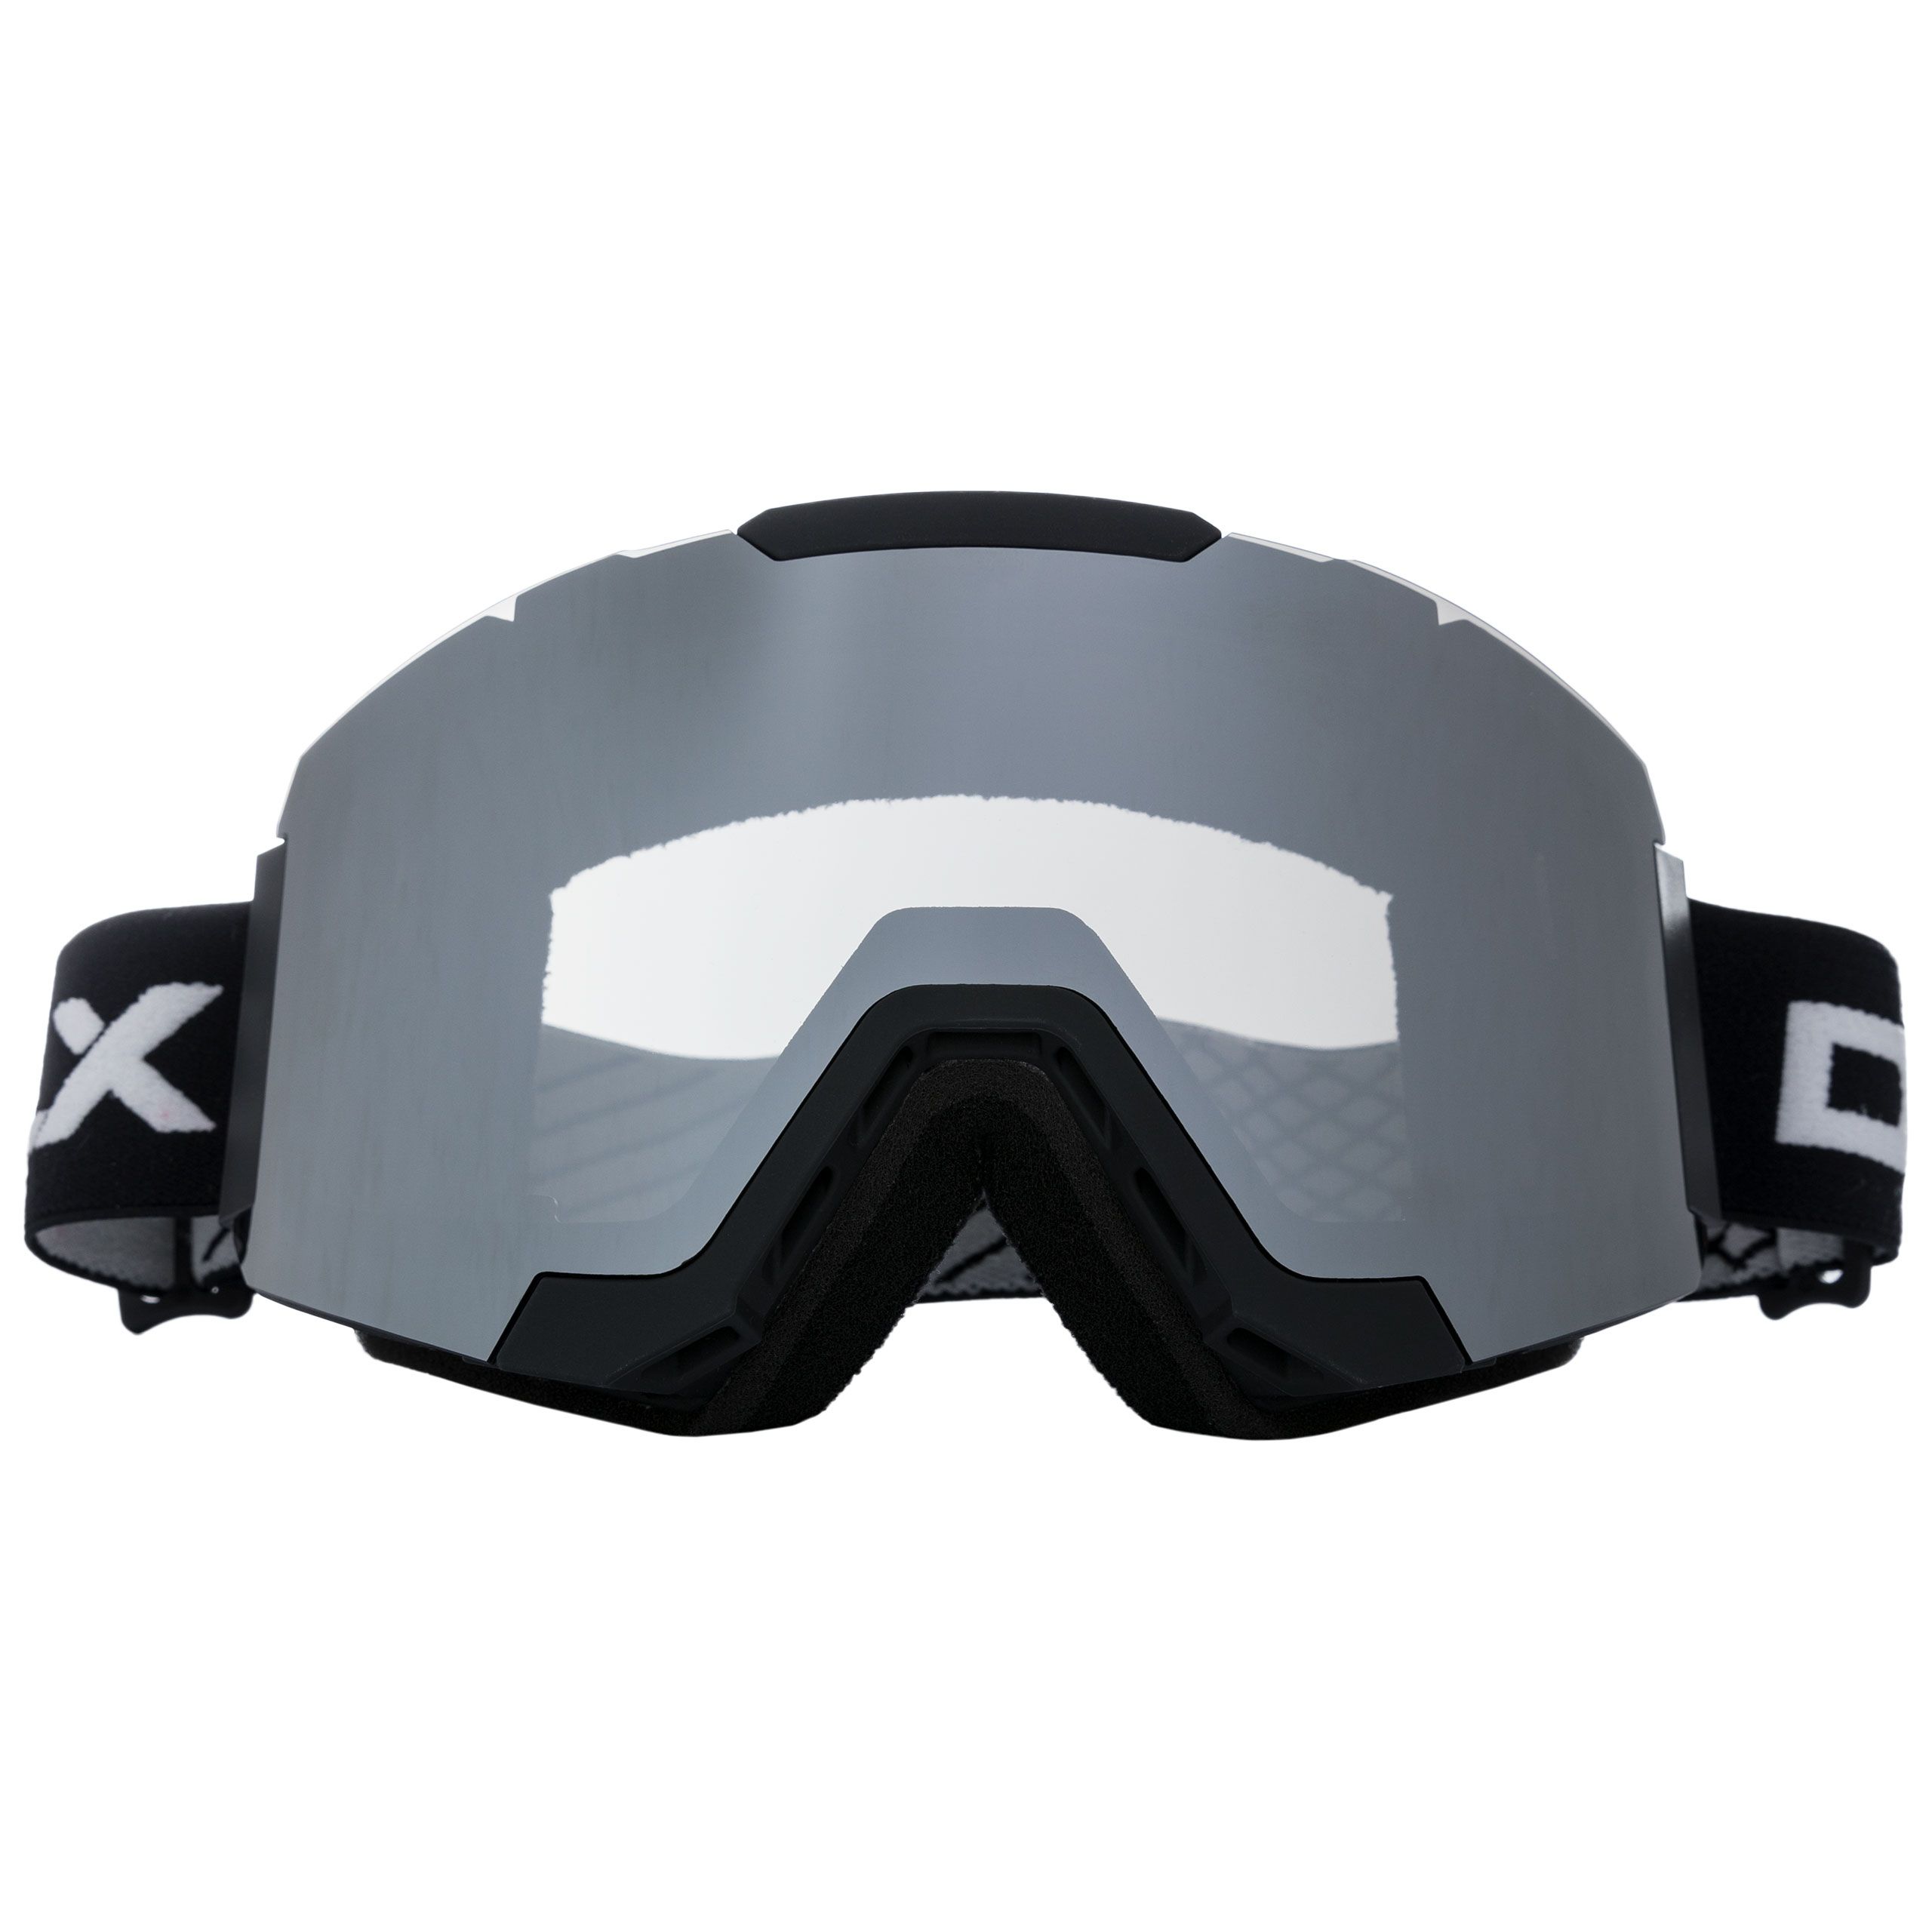 Magnetic Dlx Changeable Lens Ski Goggles